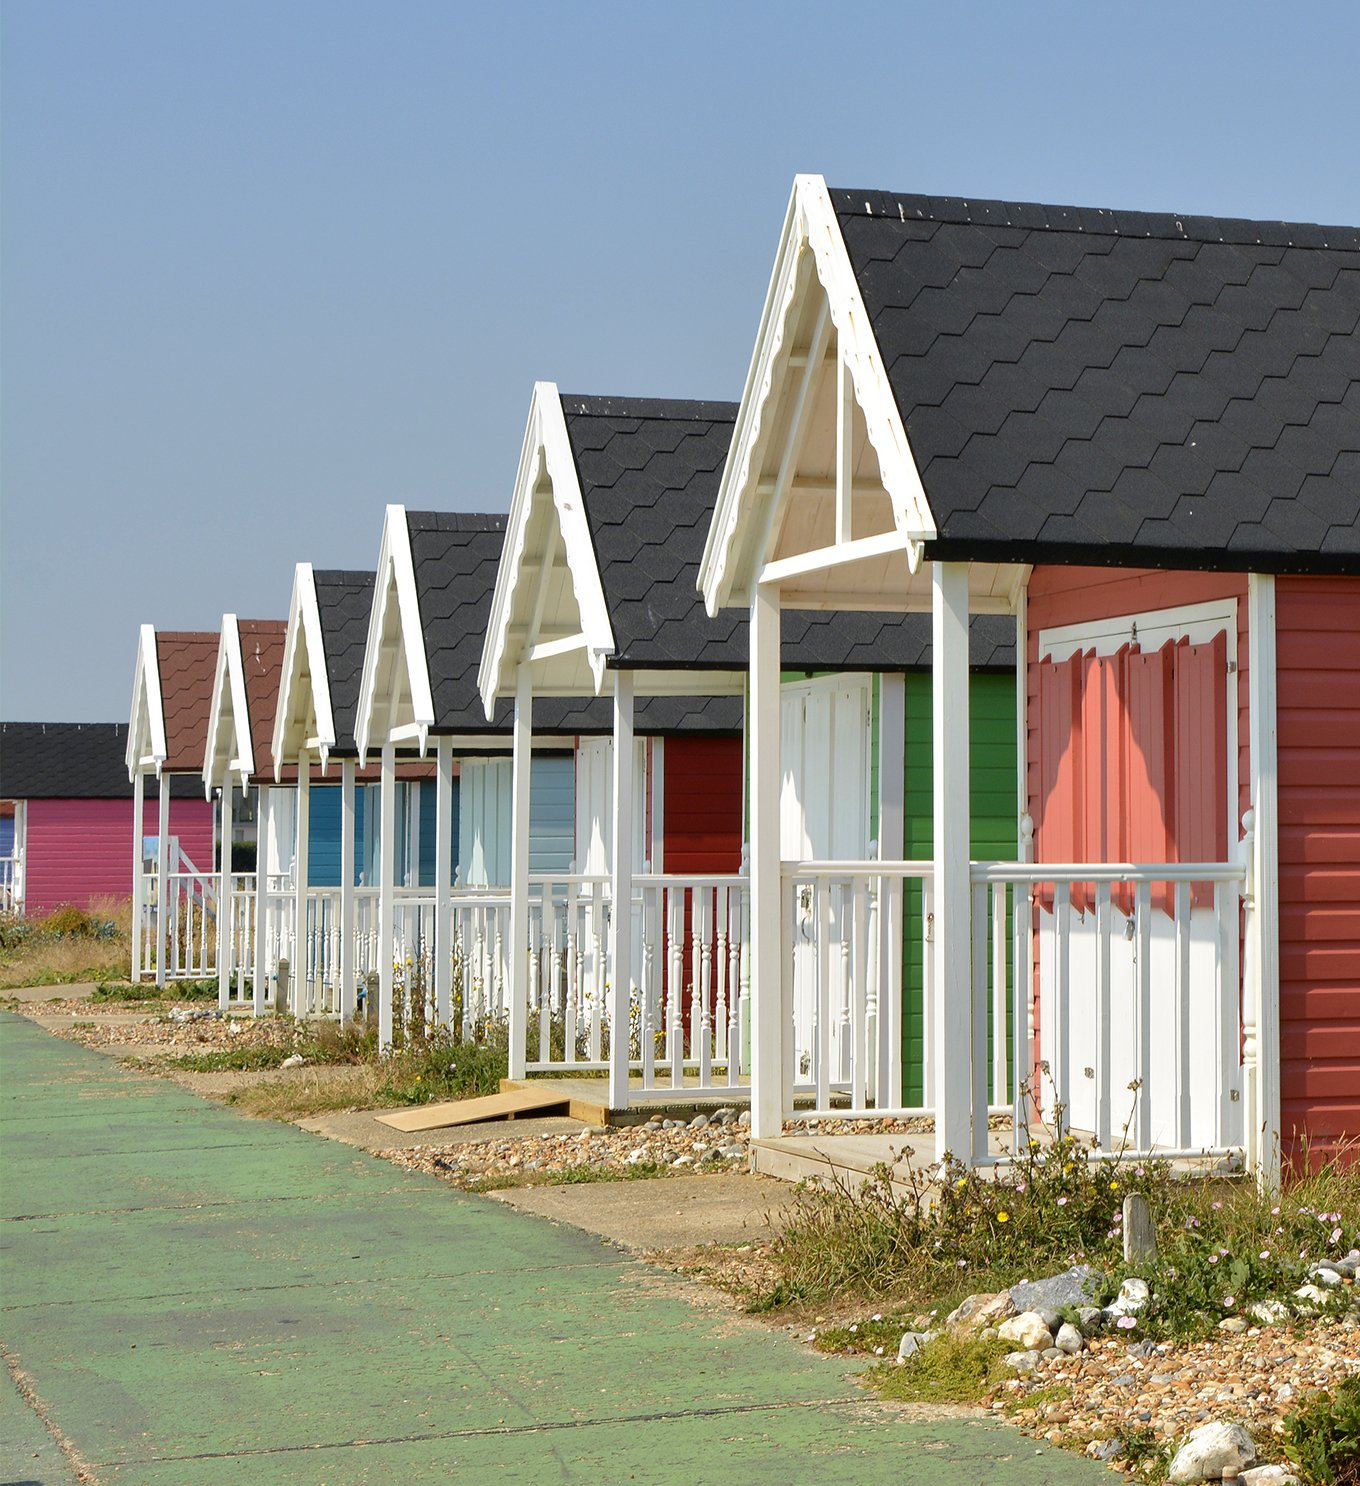 Colourful Painted Beach Huts at Lancing in West Sussex